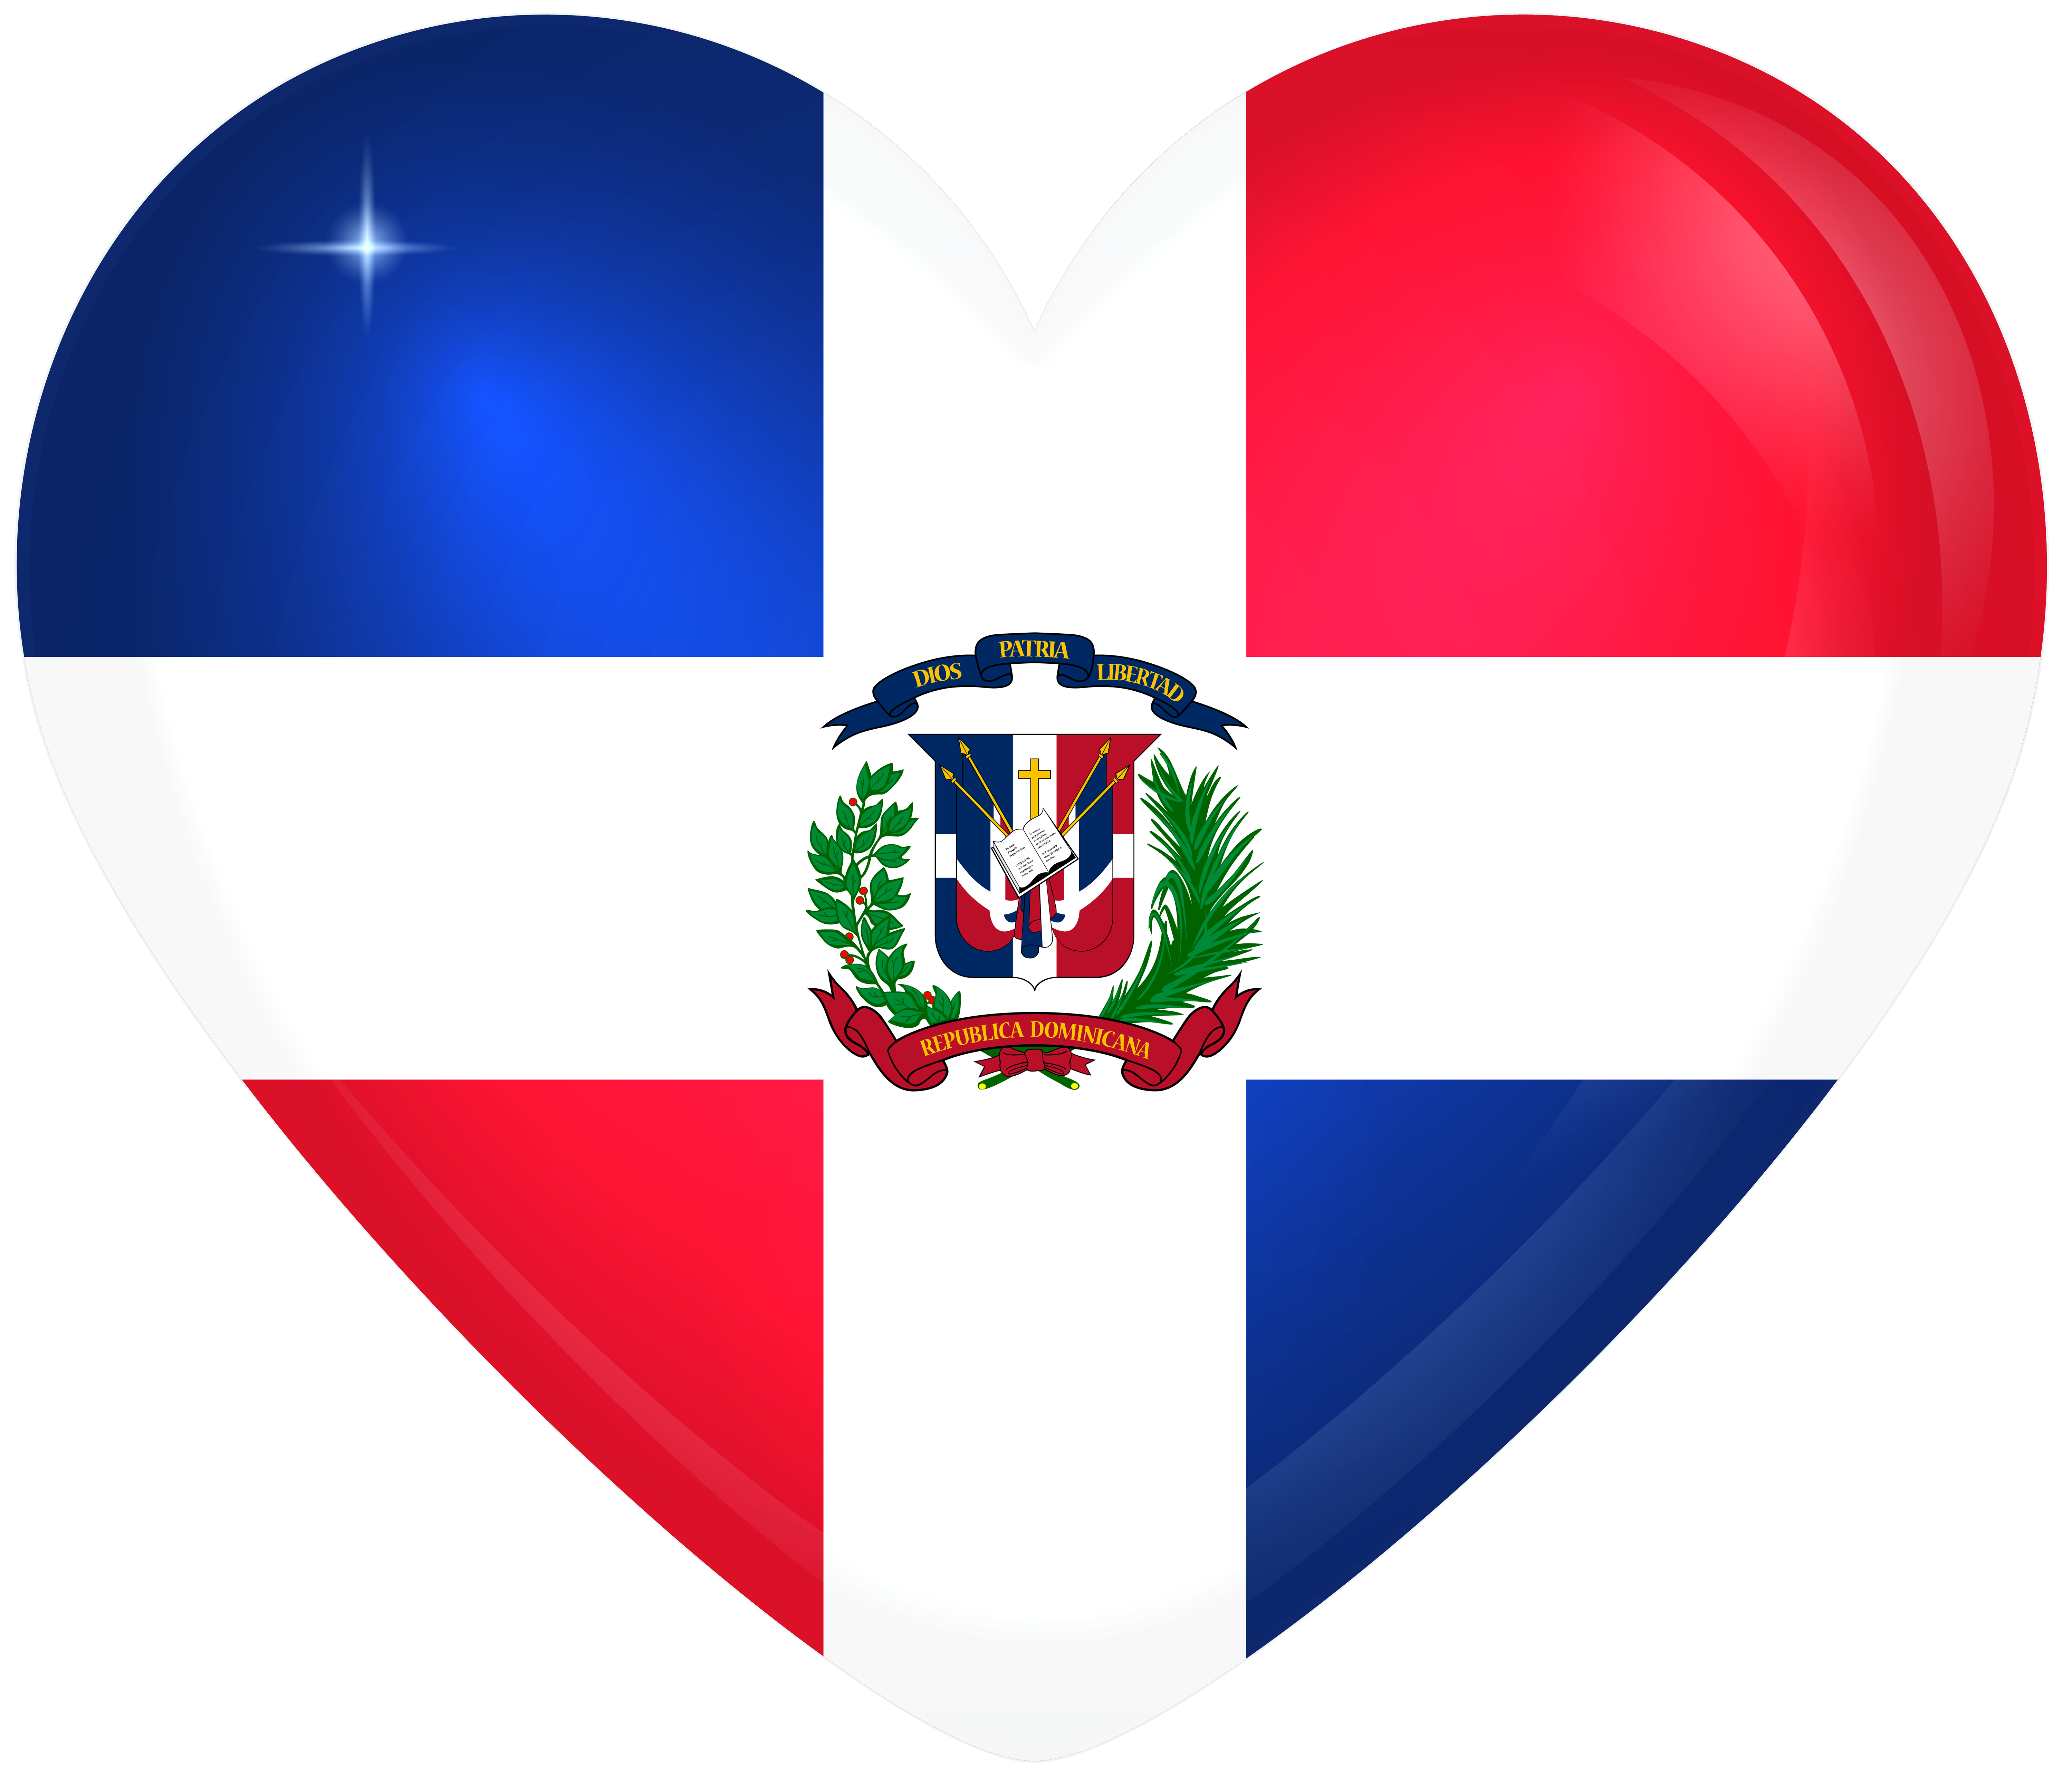 Dominican Republic Large Heart Flag Gallery Yopriceville High Quality Free Images And